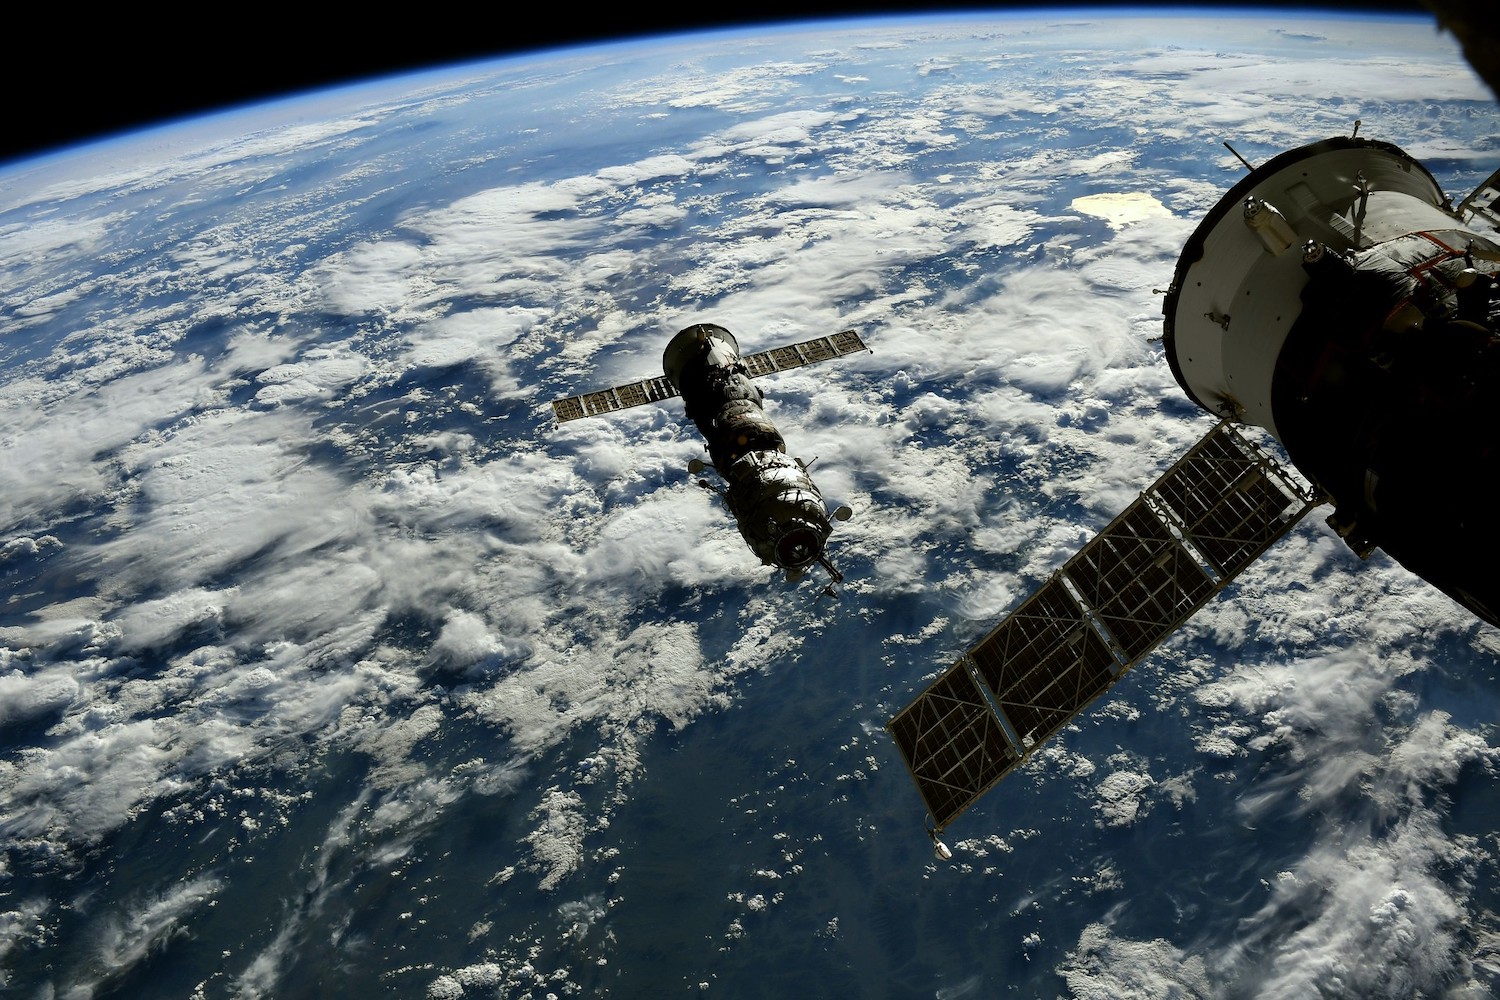 Russia's Pirs module departing the International Space Station after 20 years.